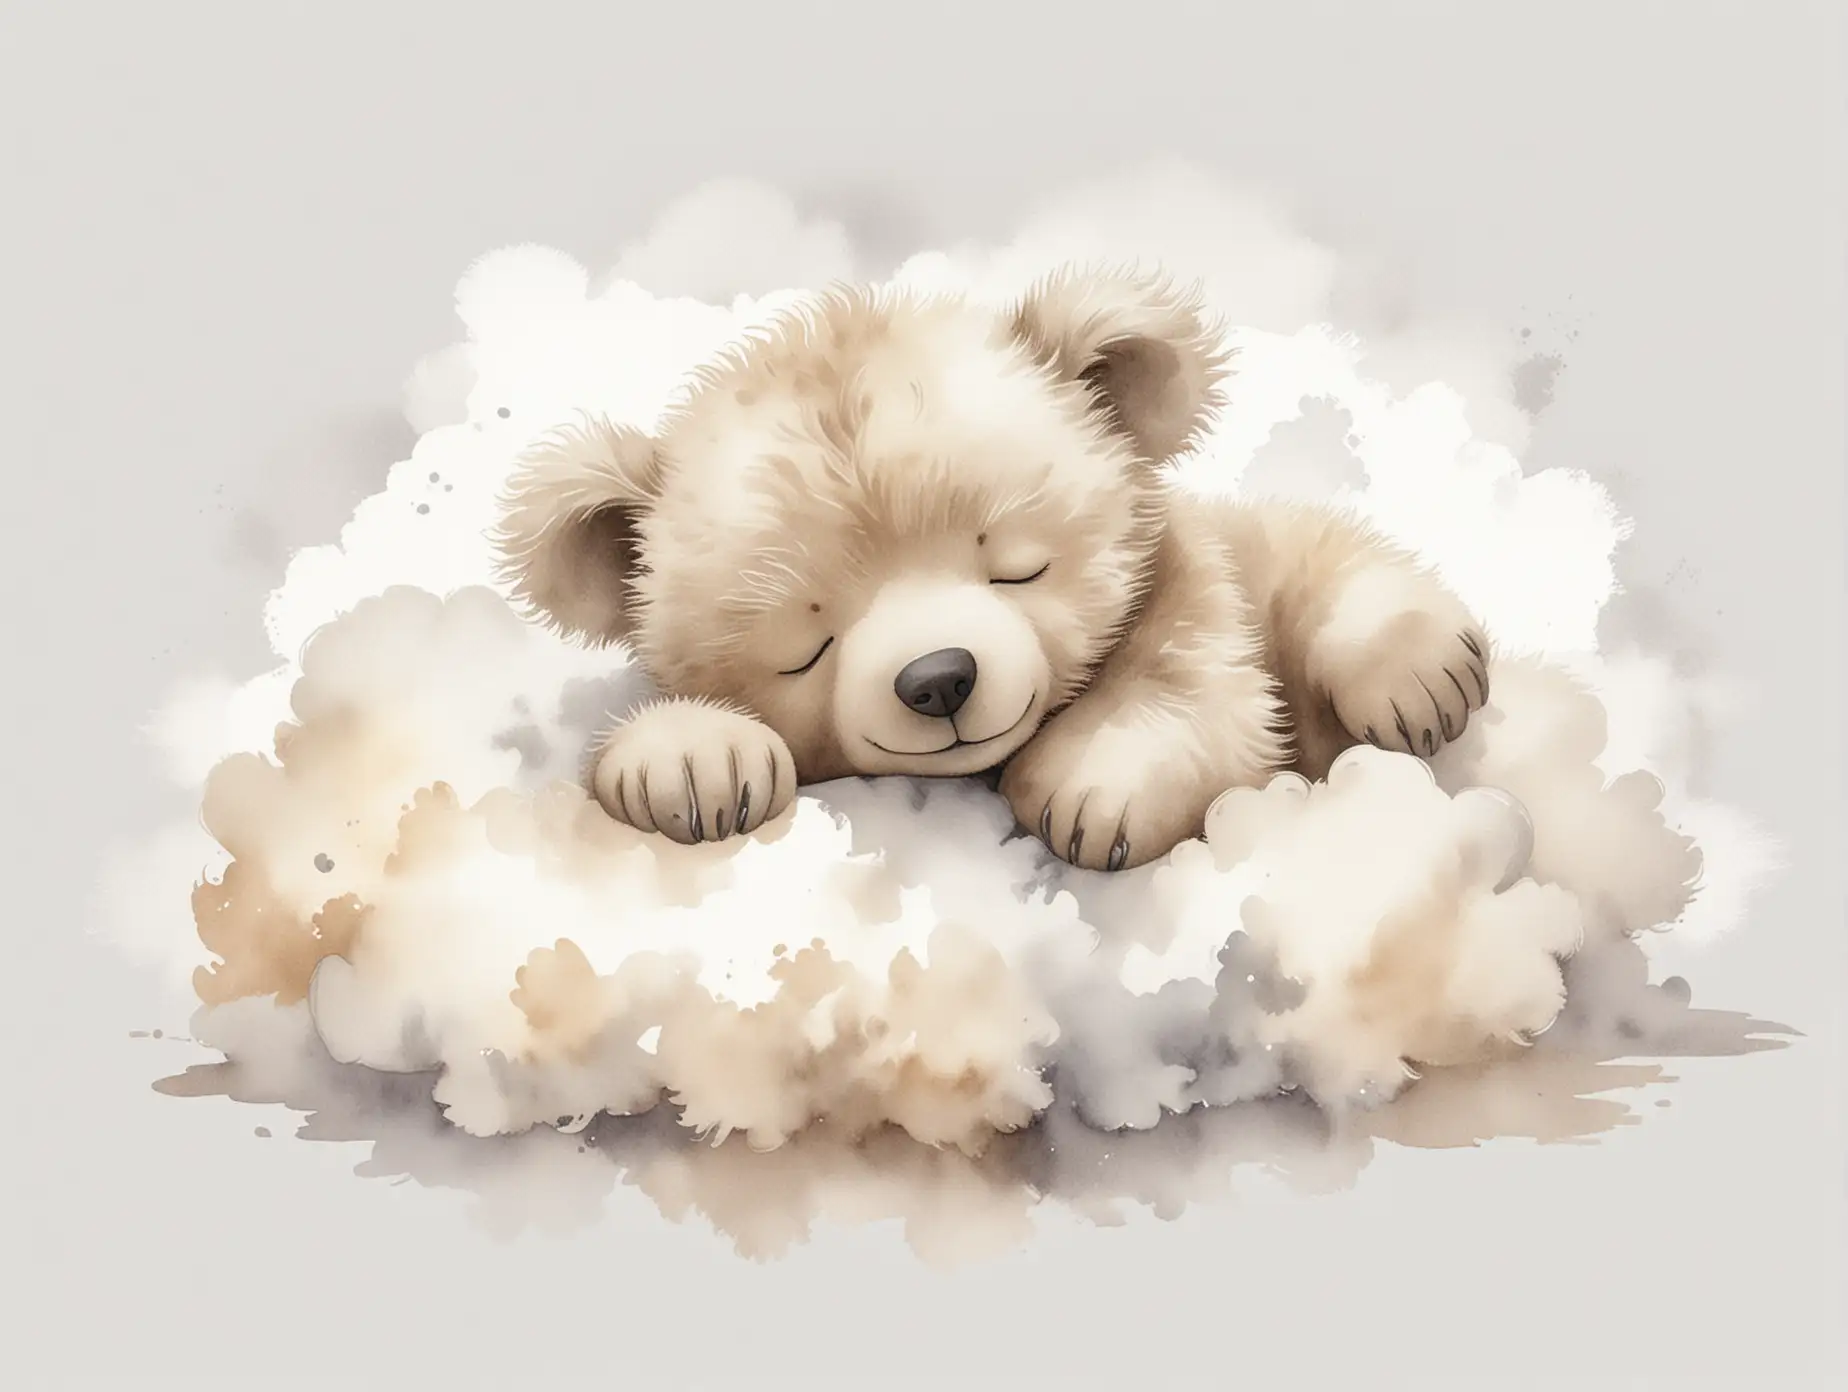 watercolour children's book illustration, muted tones, cute grey-beige baby teddy bear, sleeping with his head on a white fluffy cloud, bum in the air, colours in white, cream, grey-beige, isolated on a solid white background